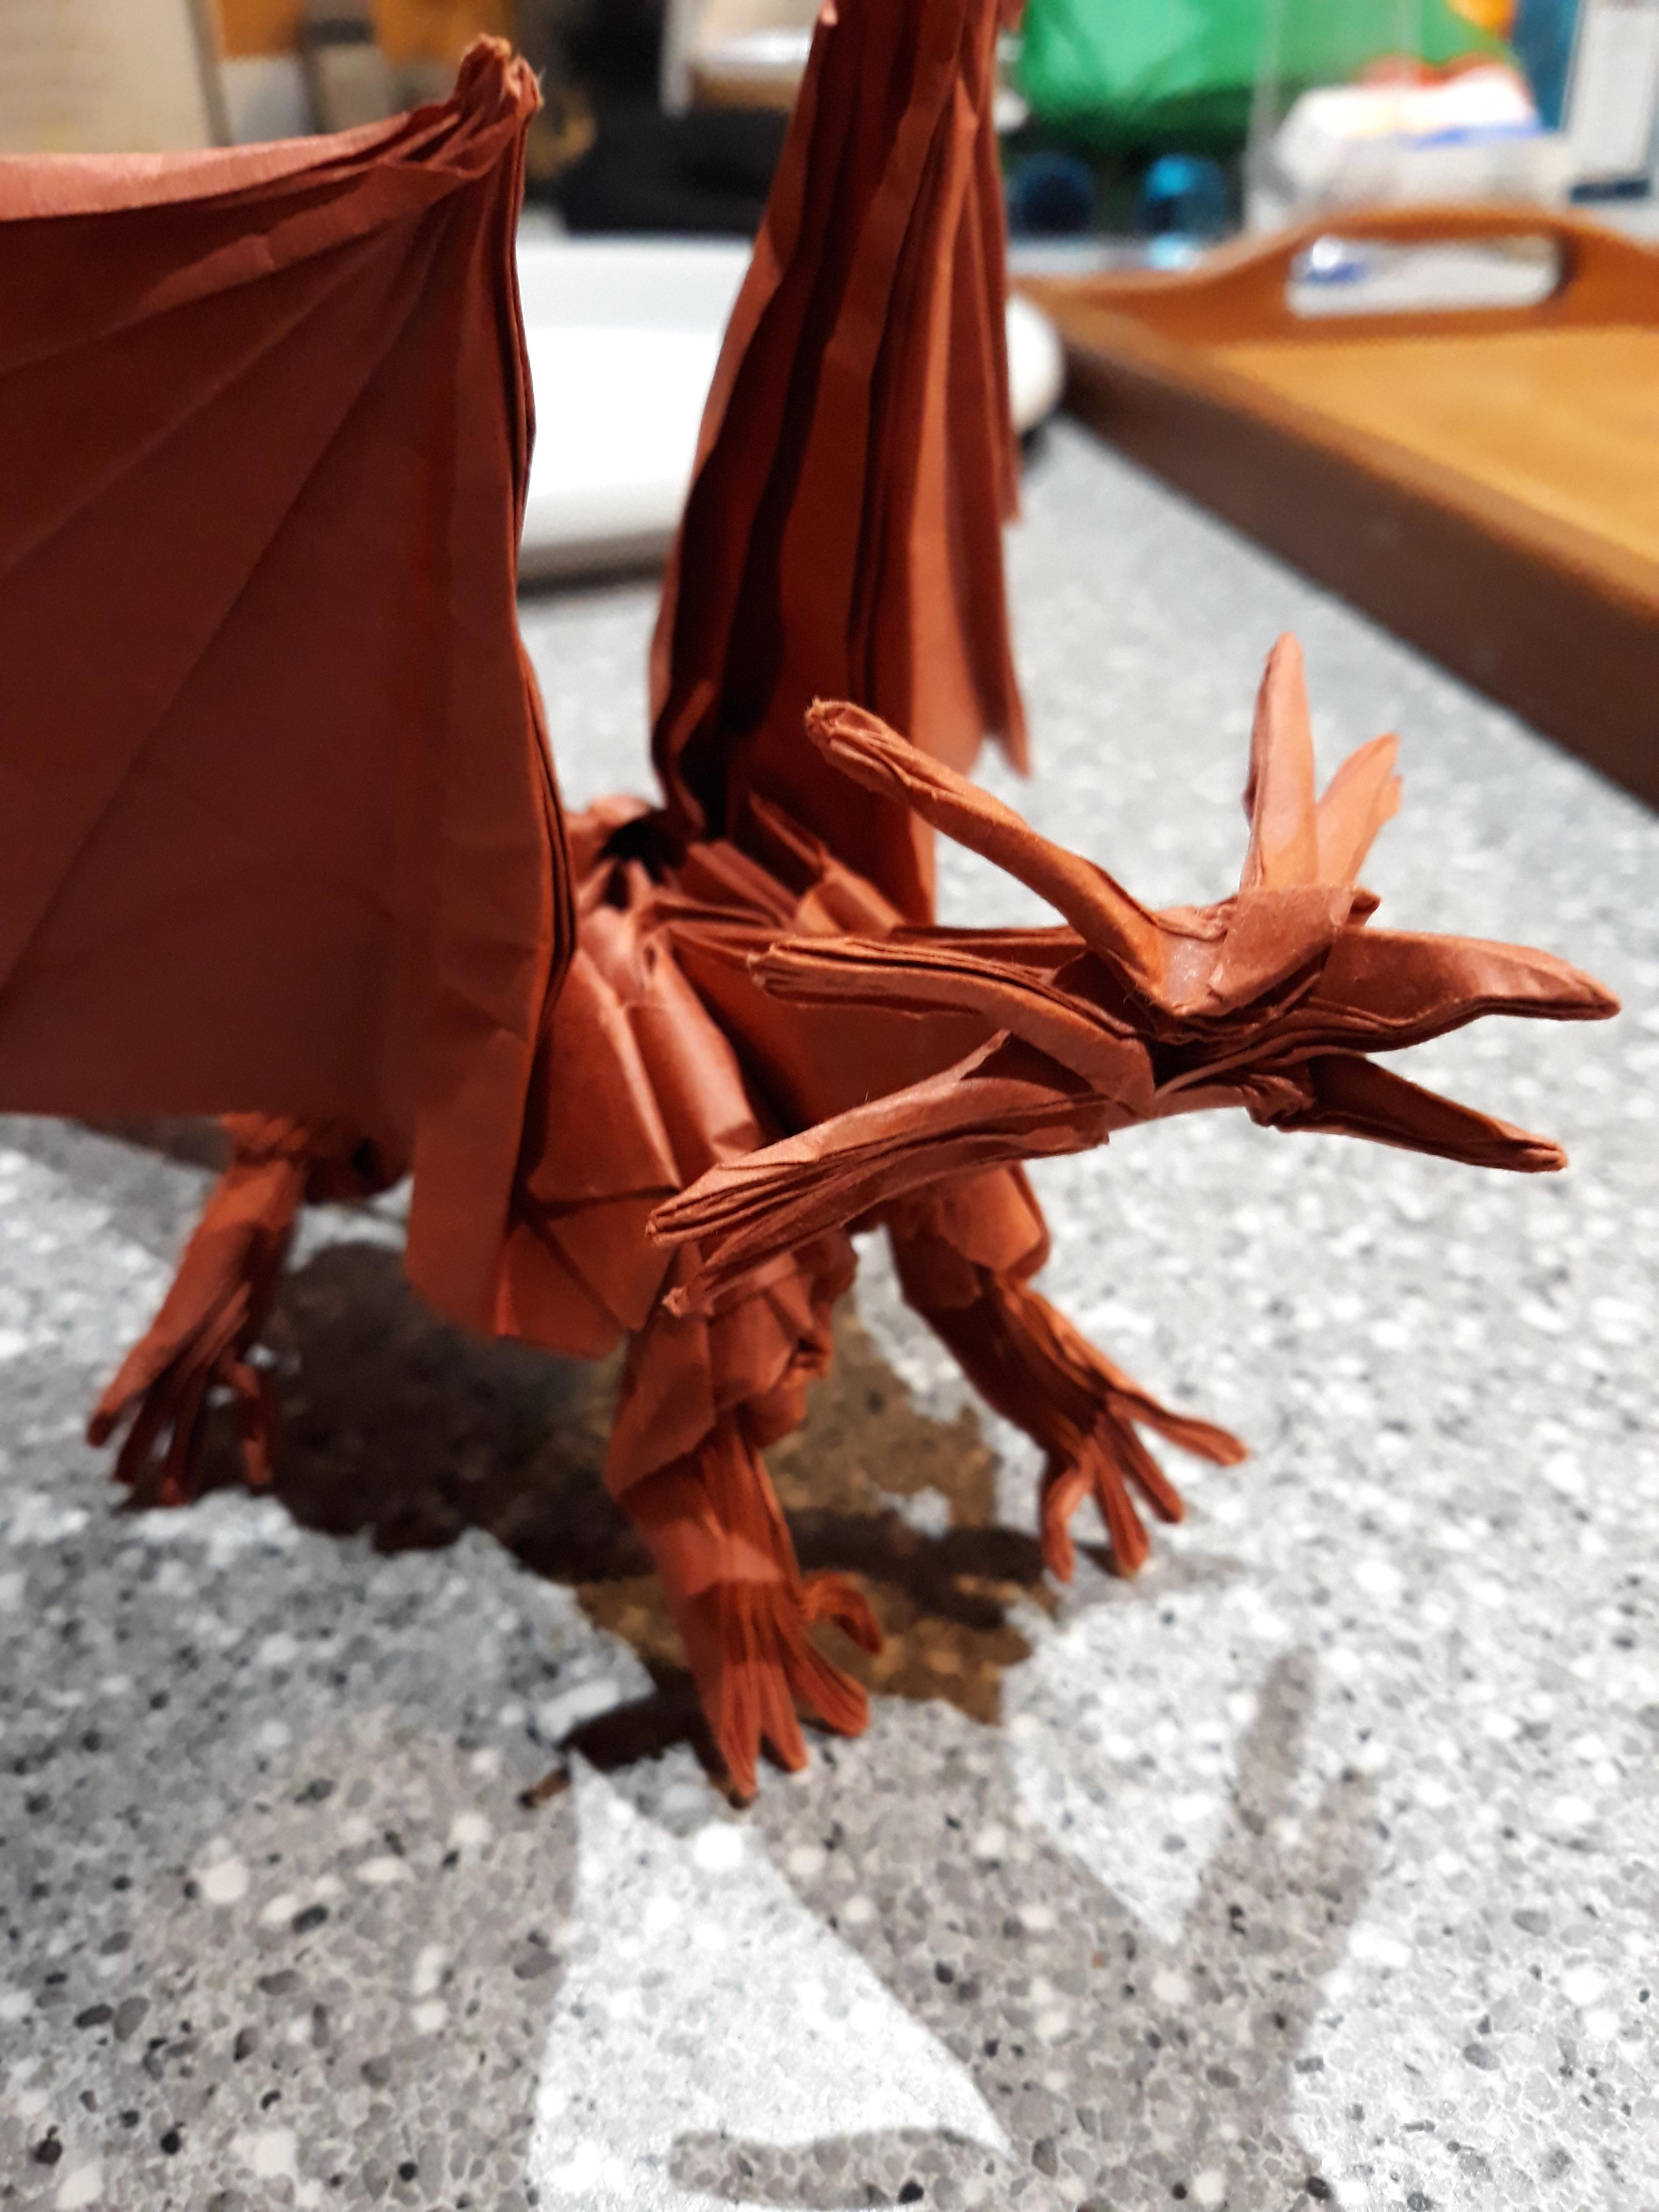 How To Do An Origami Dragon 3rd Attempt On The Ancient Dragon What Do U Think Origami